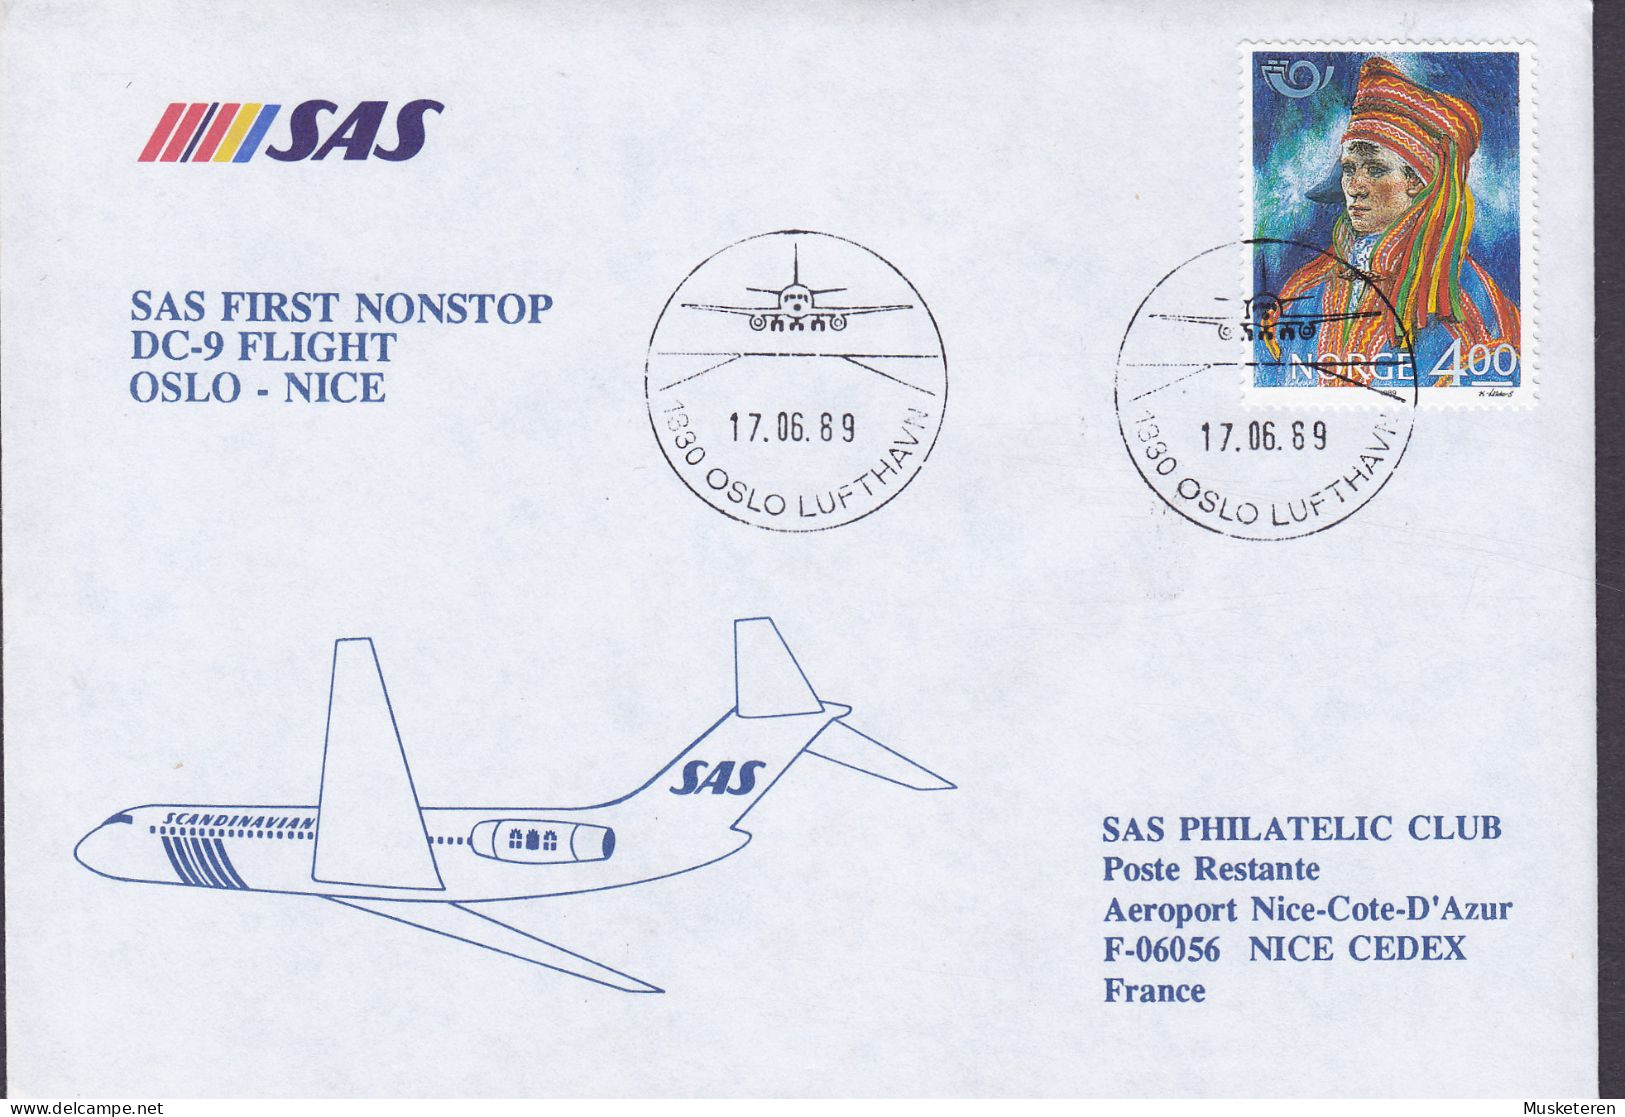 Norway SAS First Nonstop DC-9 Flight OSLO-NICE 1989 Cover Brief Lettre NORDEN Nordia Nordic Joint Issue Stamp - Briefe U. Dokumente